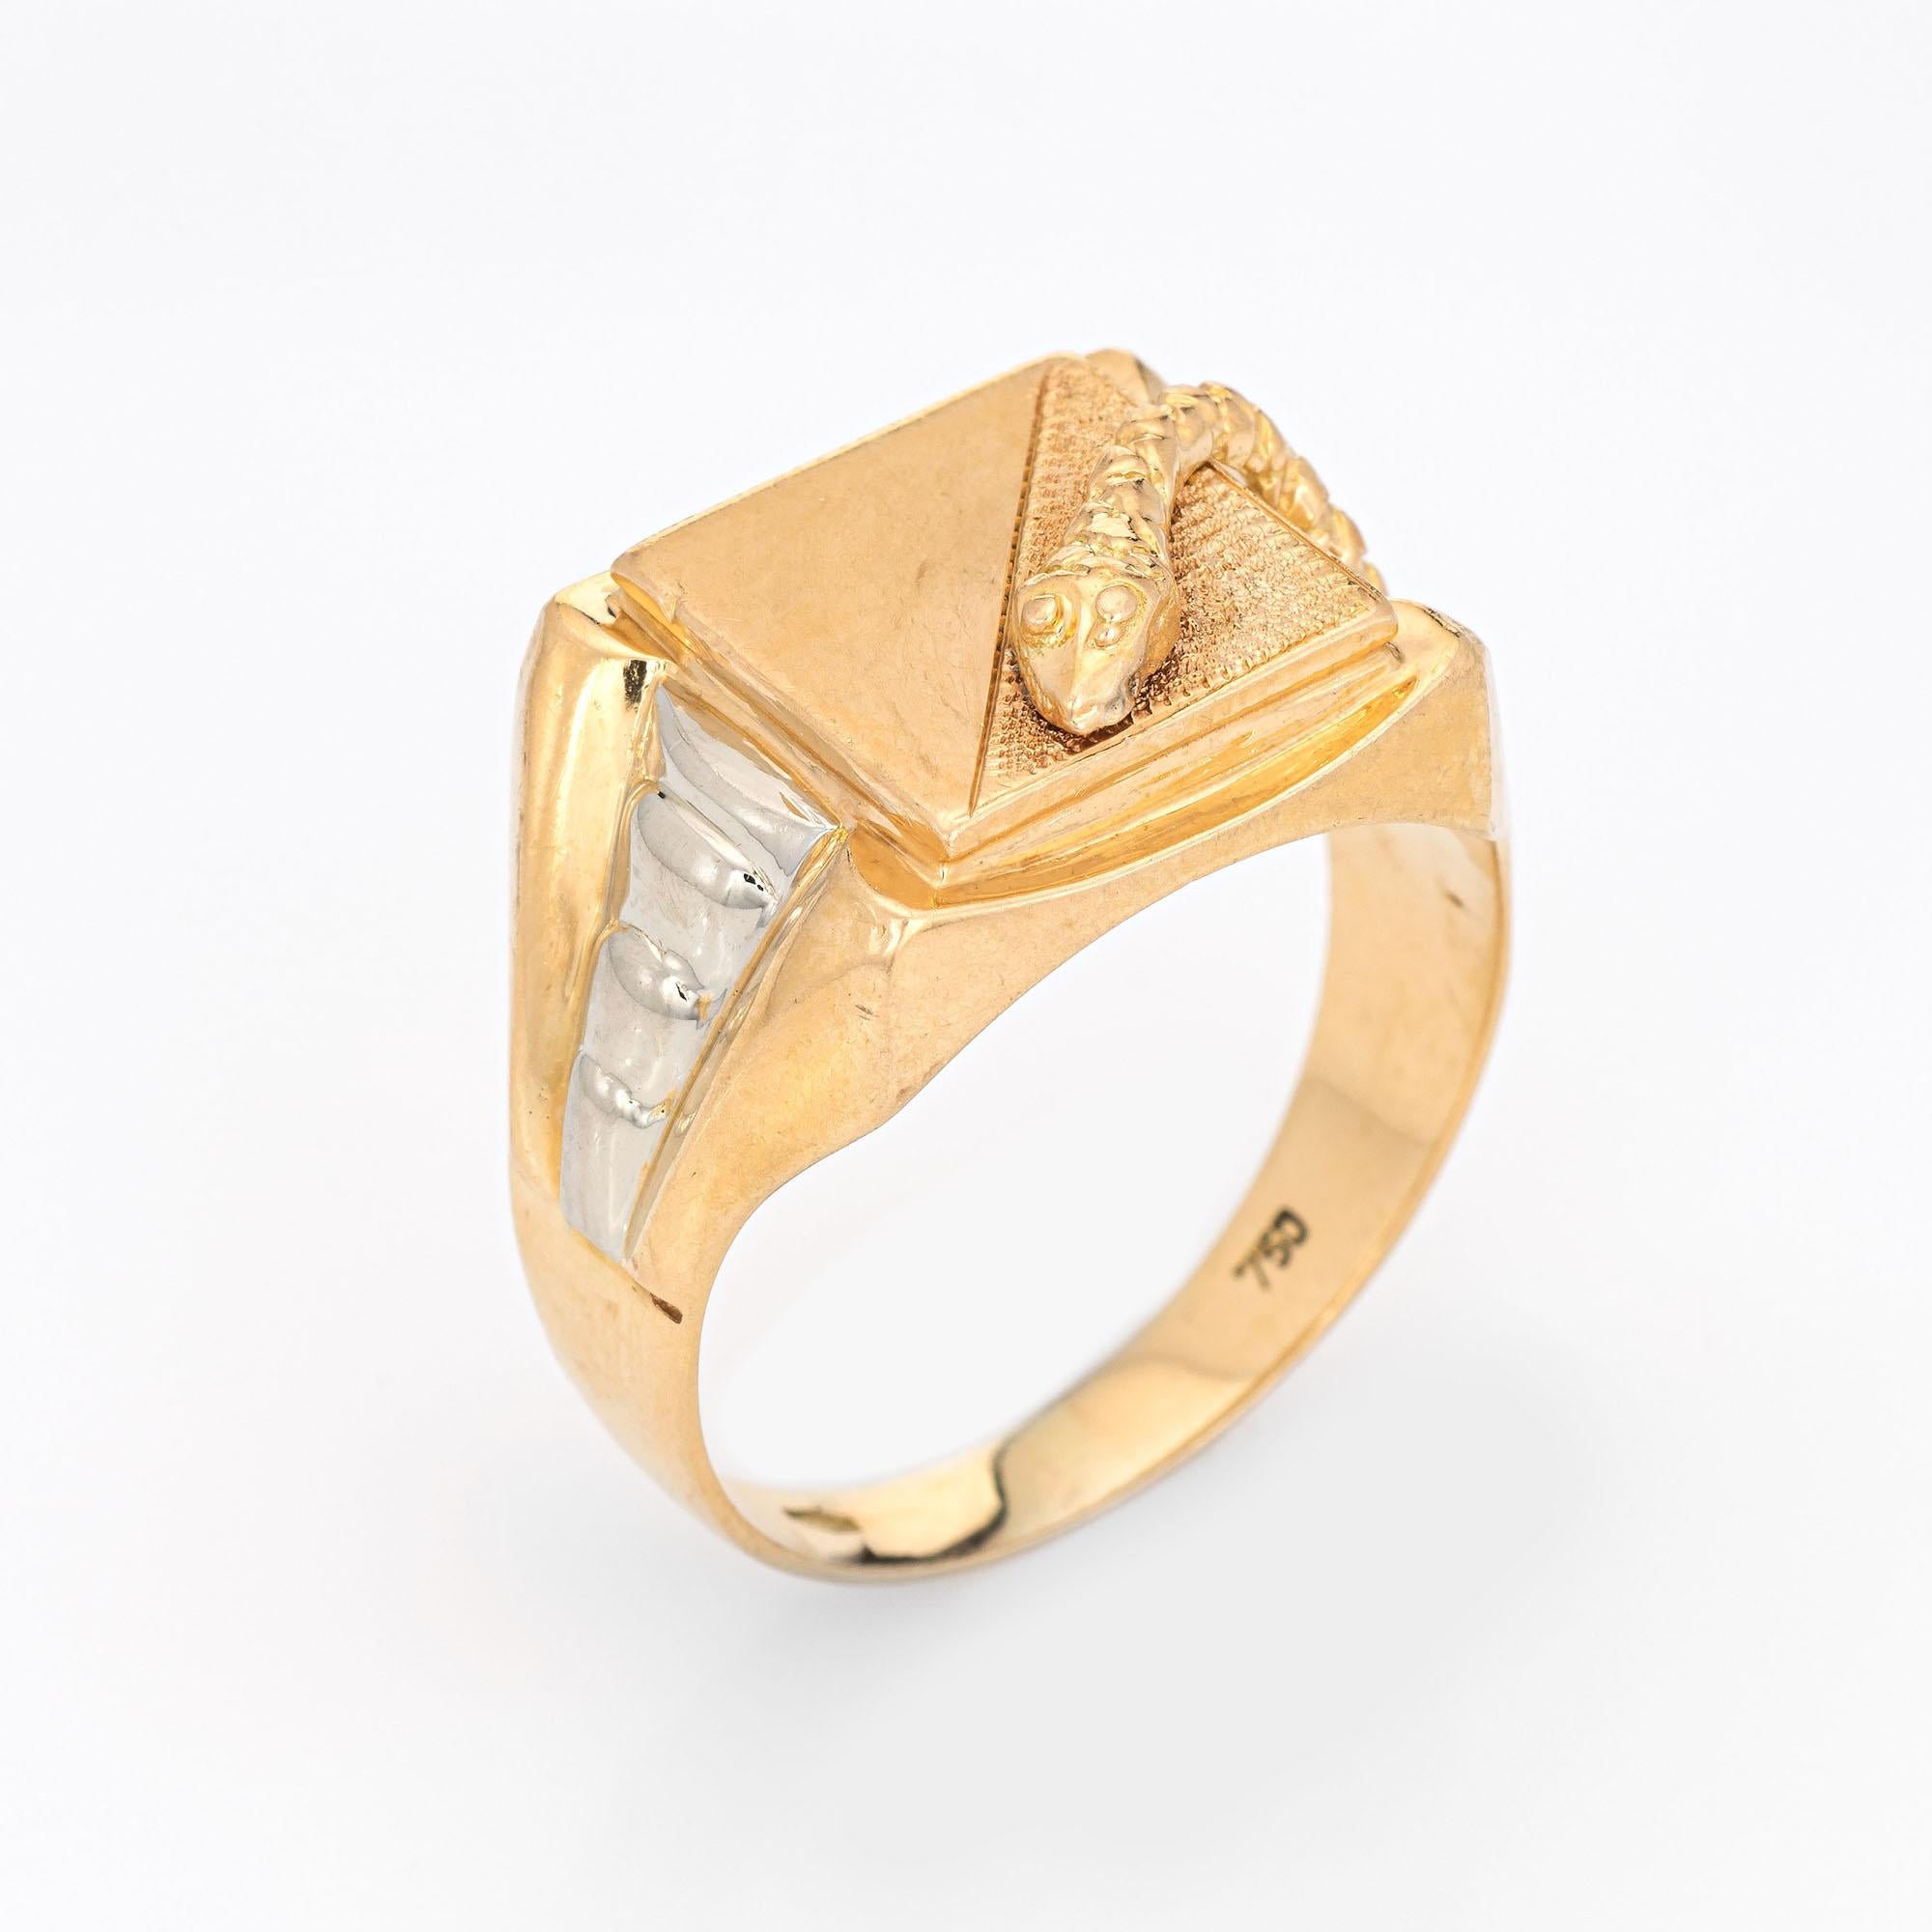 Stylish vintage snake ring (circa 1960s to 1970s) crafted in 18 karat yellow gold. 

The square signet mount features a snake meandering from the side shank onto the mount. Half of the square mount can accommodate personalization if desired.  The